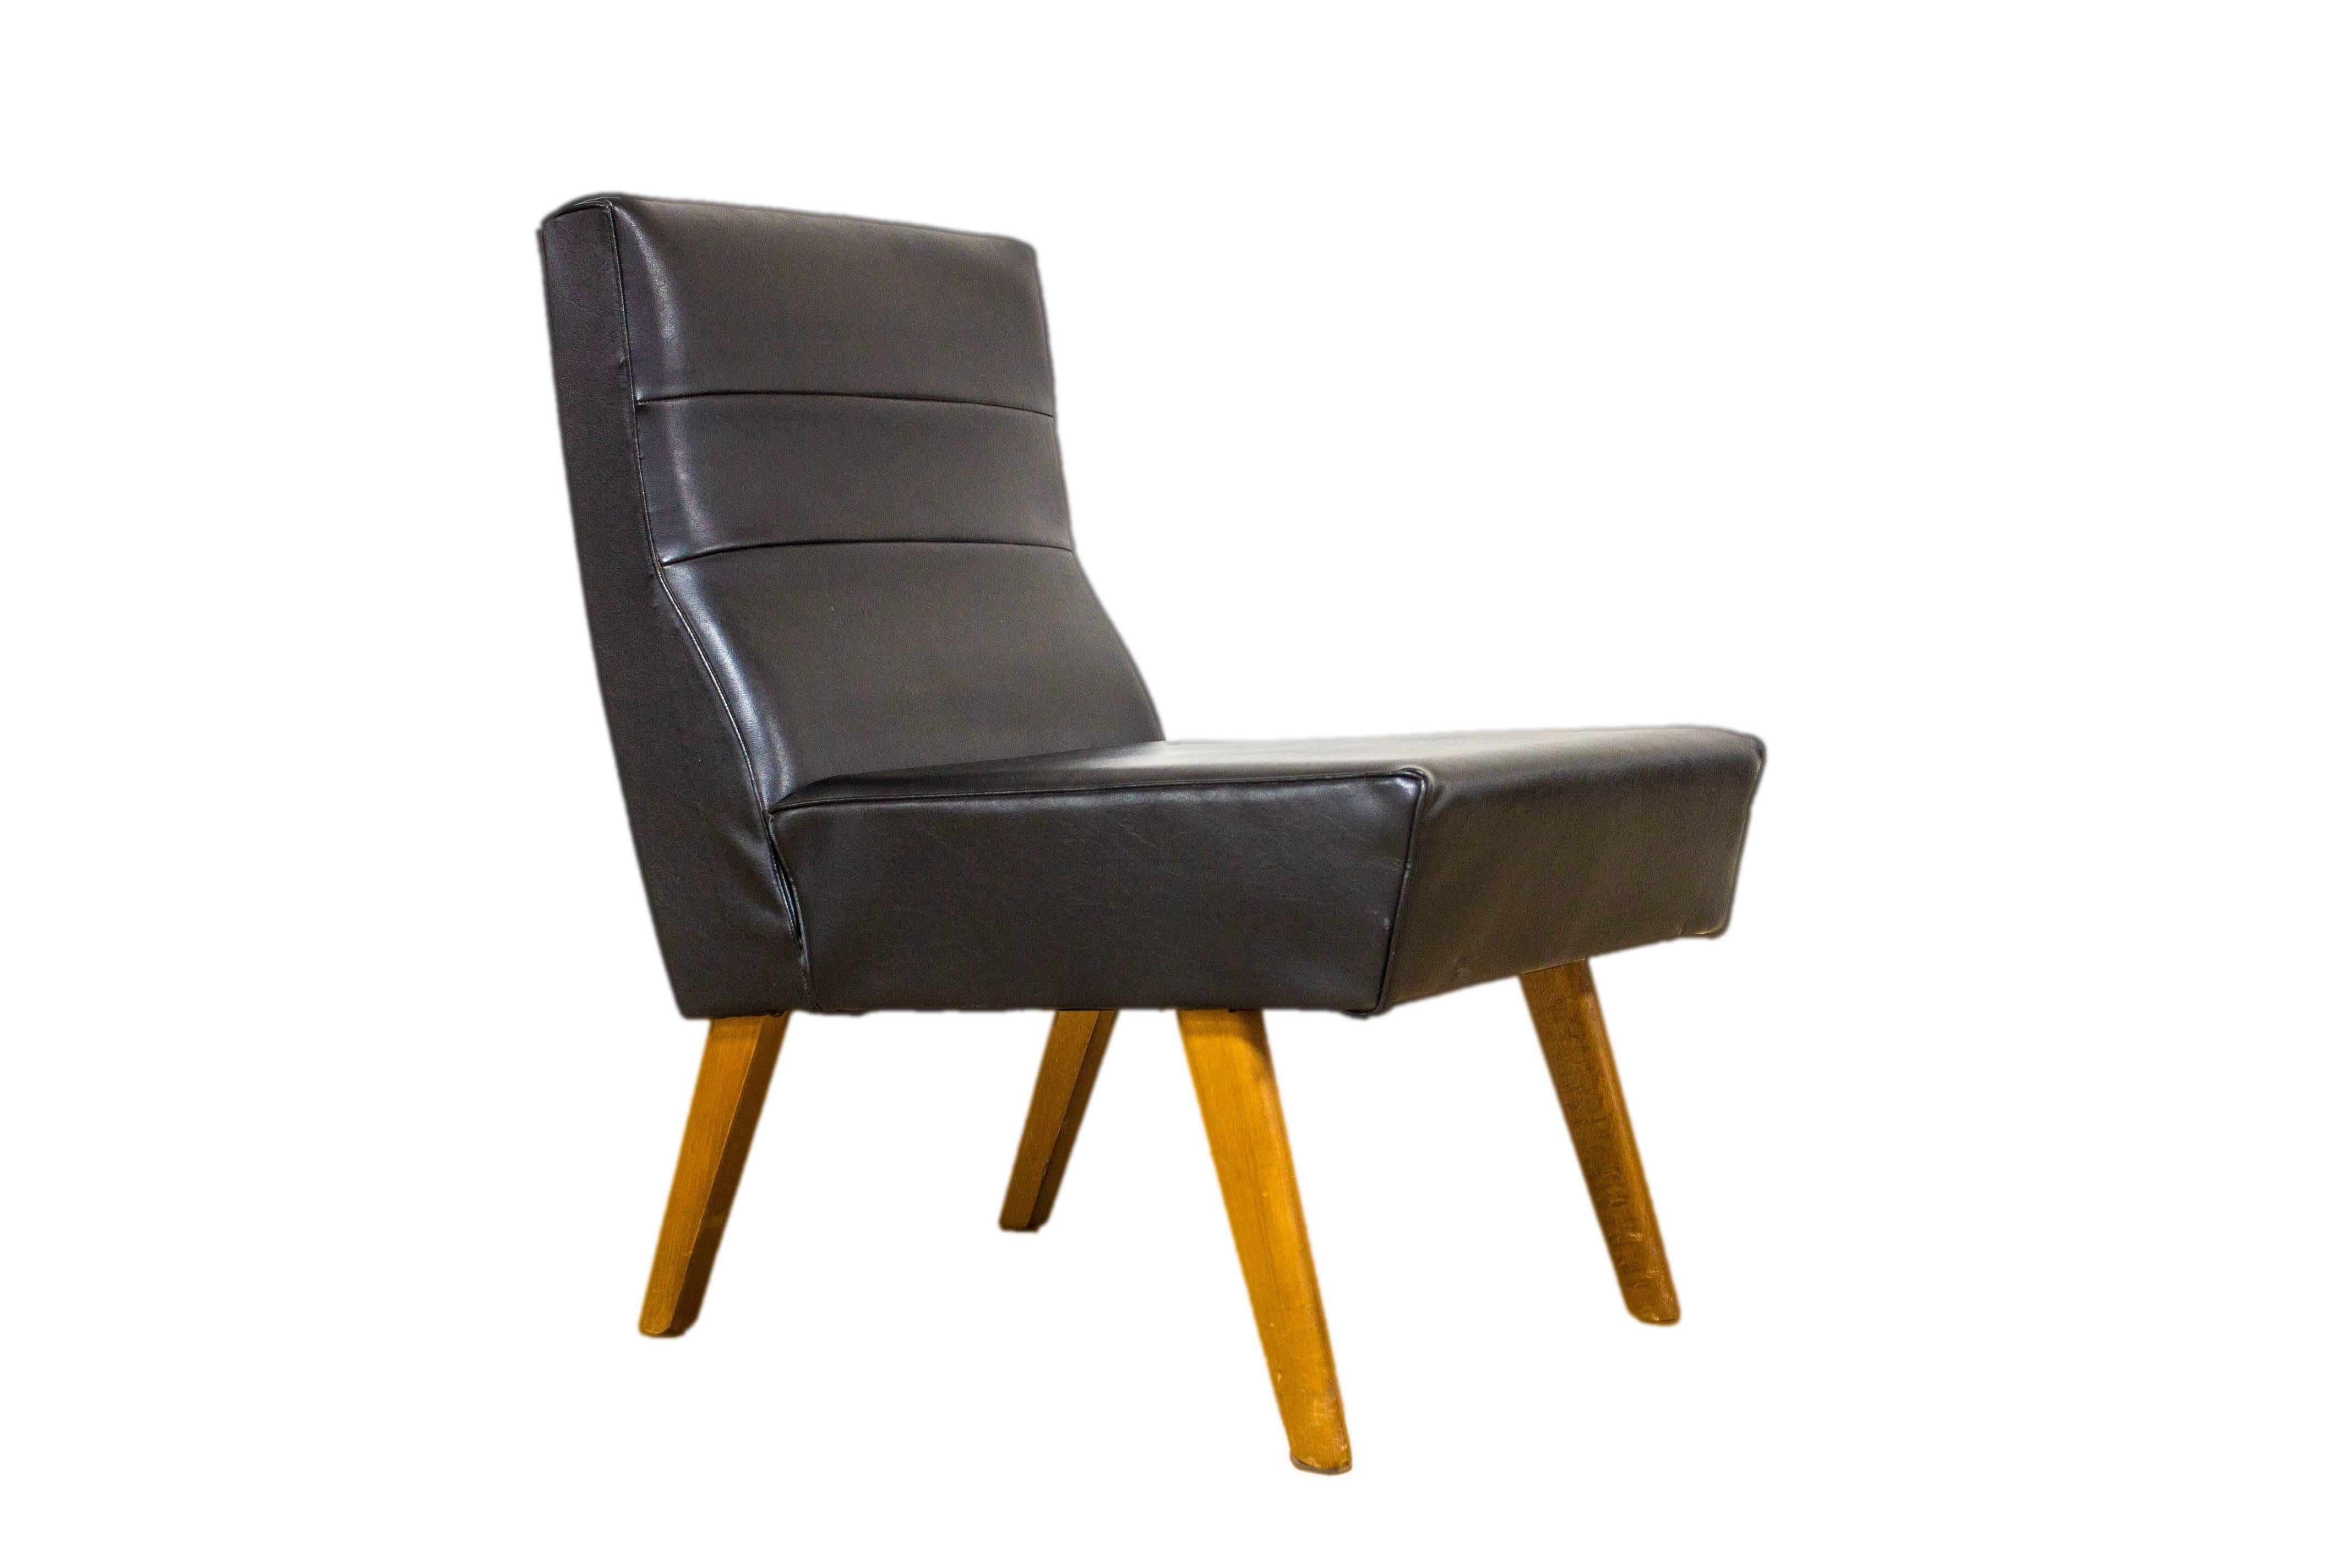 Danish Teak and Black Vinyl Lounge Chair Retro Eames G Plan Era In Excellent Condition For Sale In Greater Manchester, GB